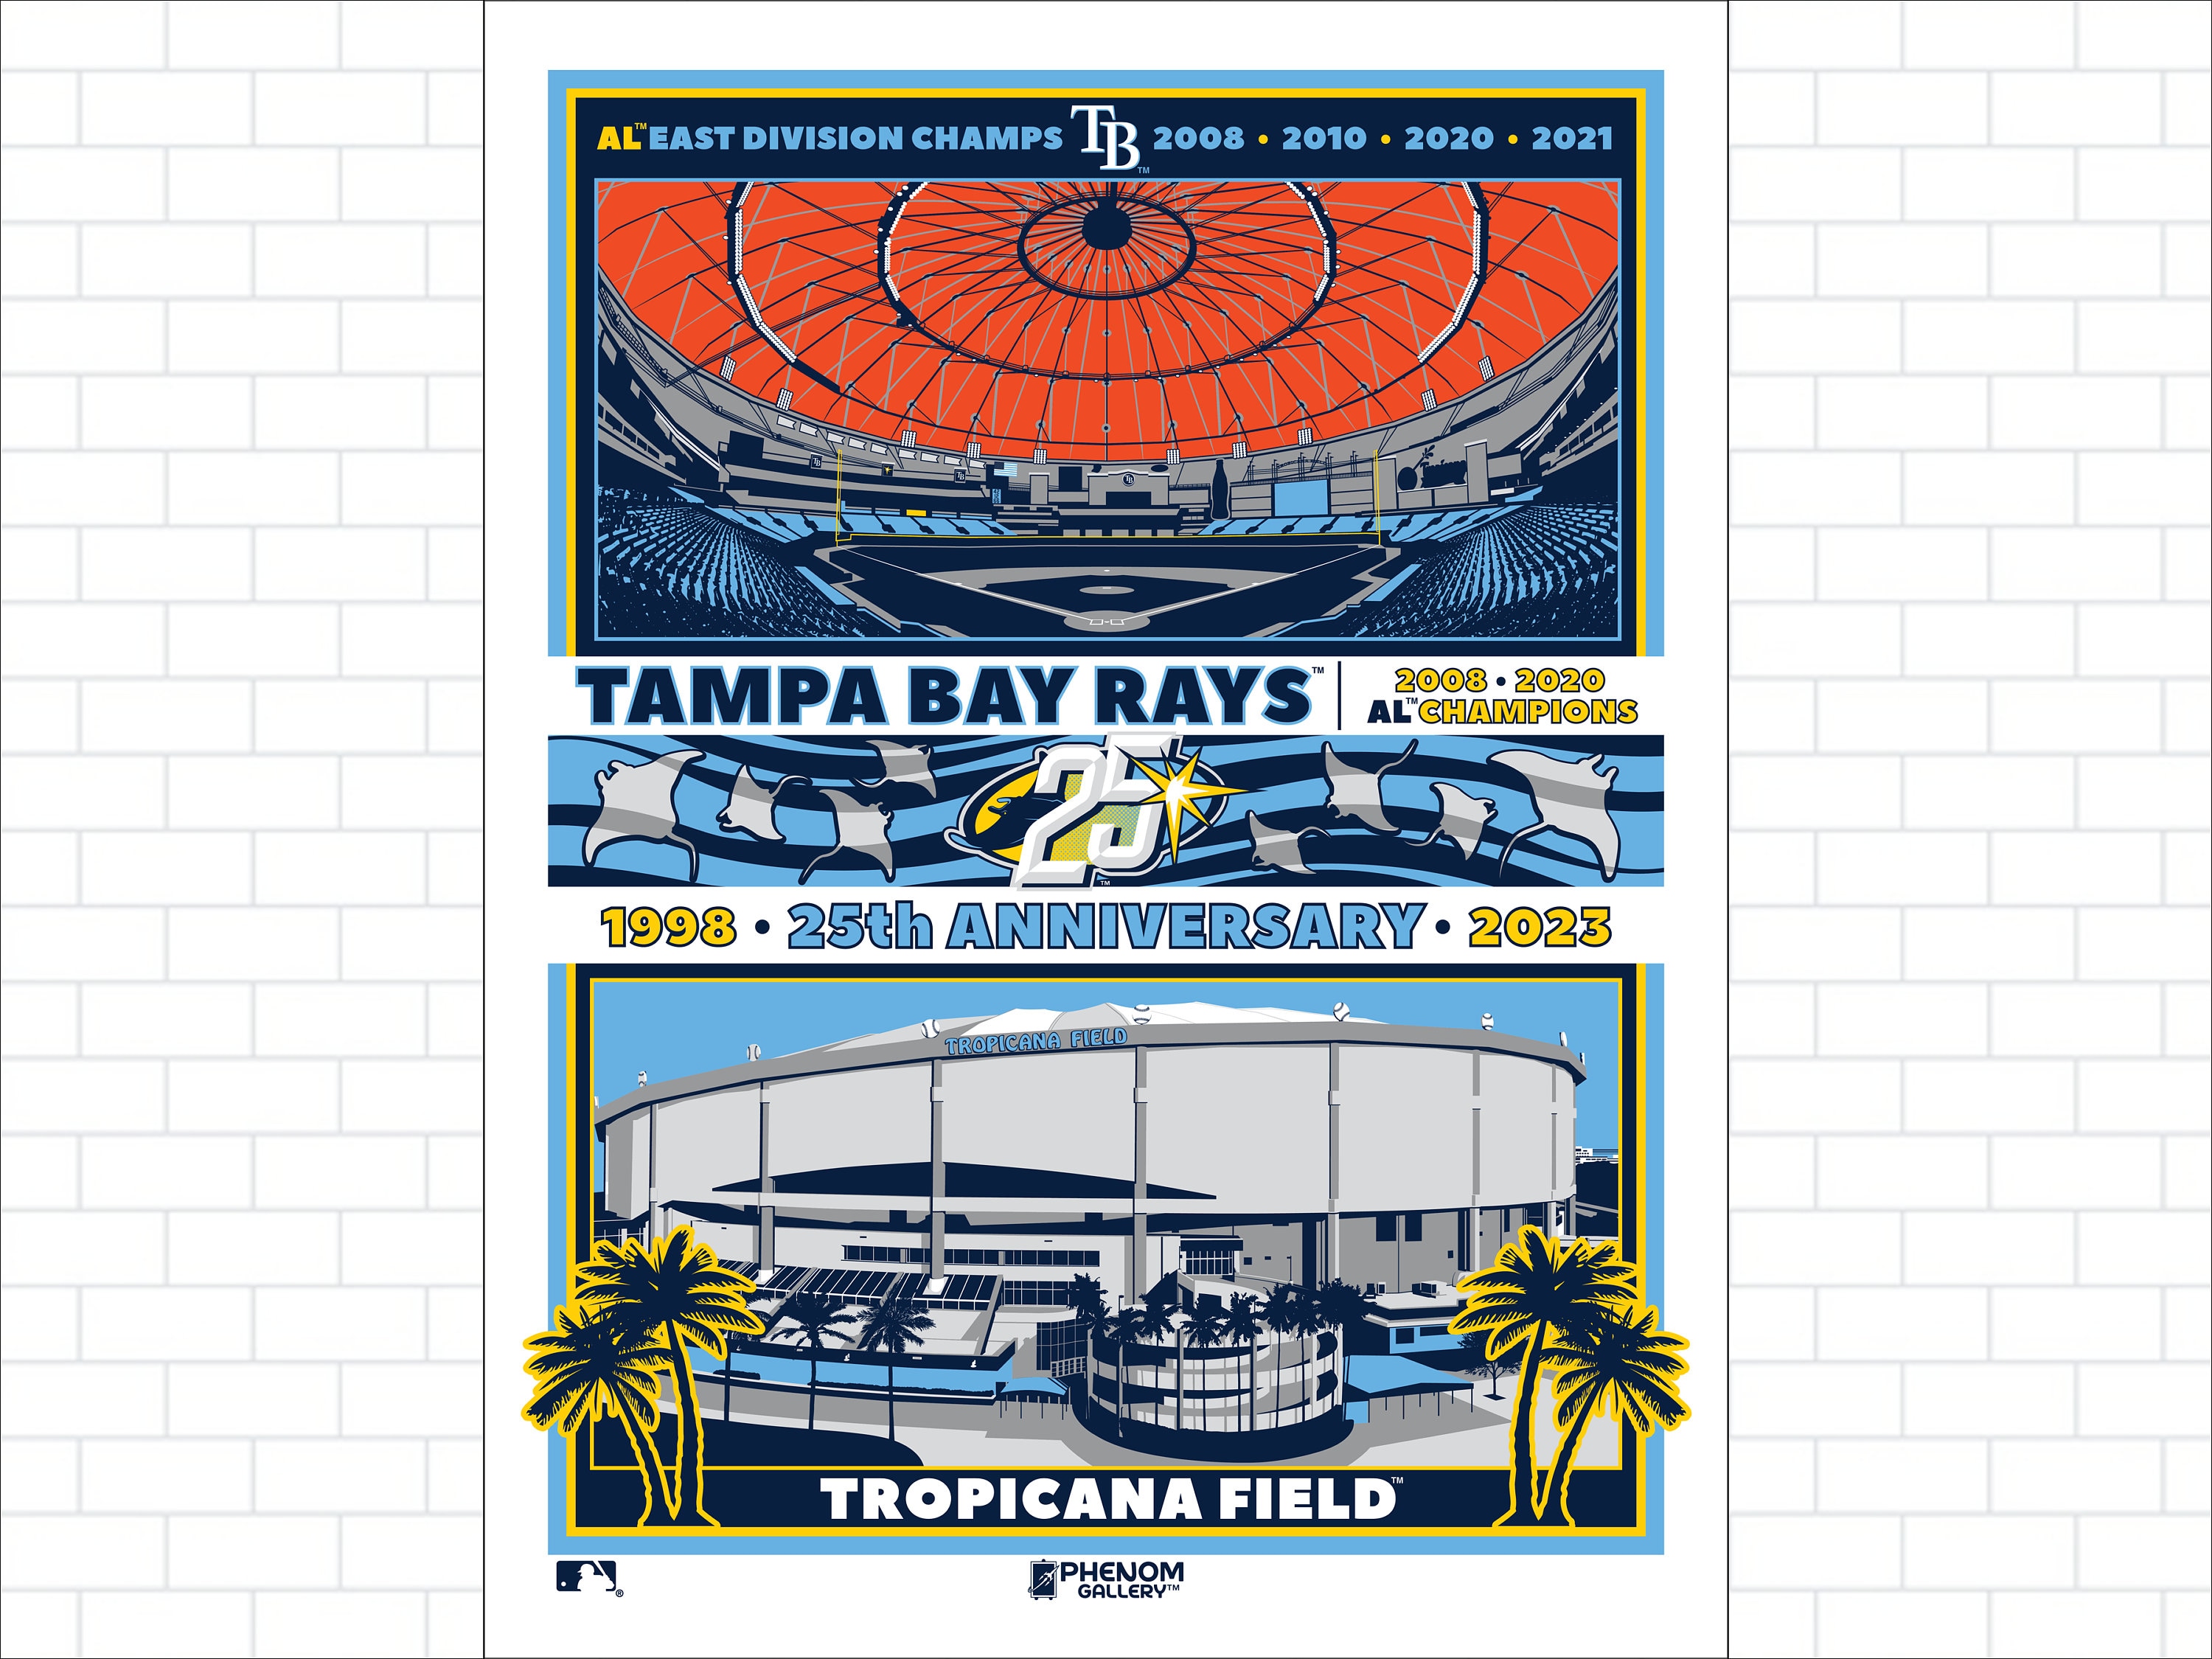 OFFICIALLY LICENSED Tampa Bay Rays 25th Anniversary 1998 